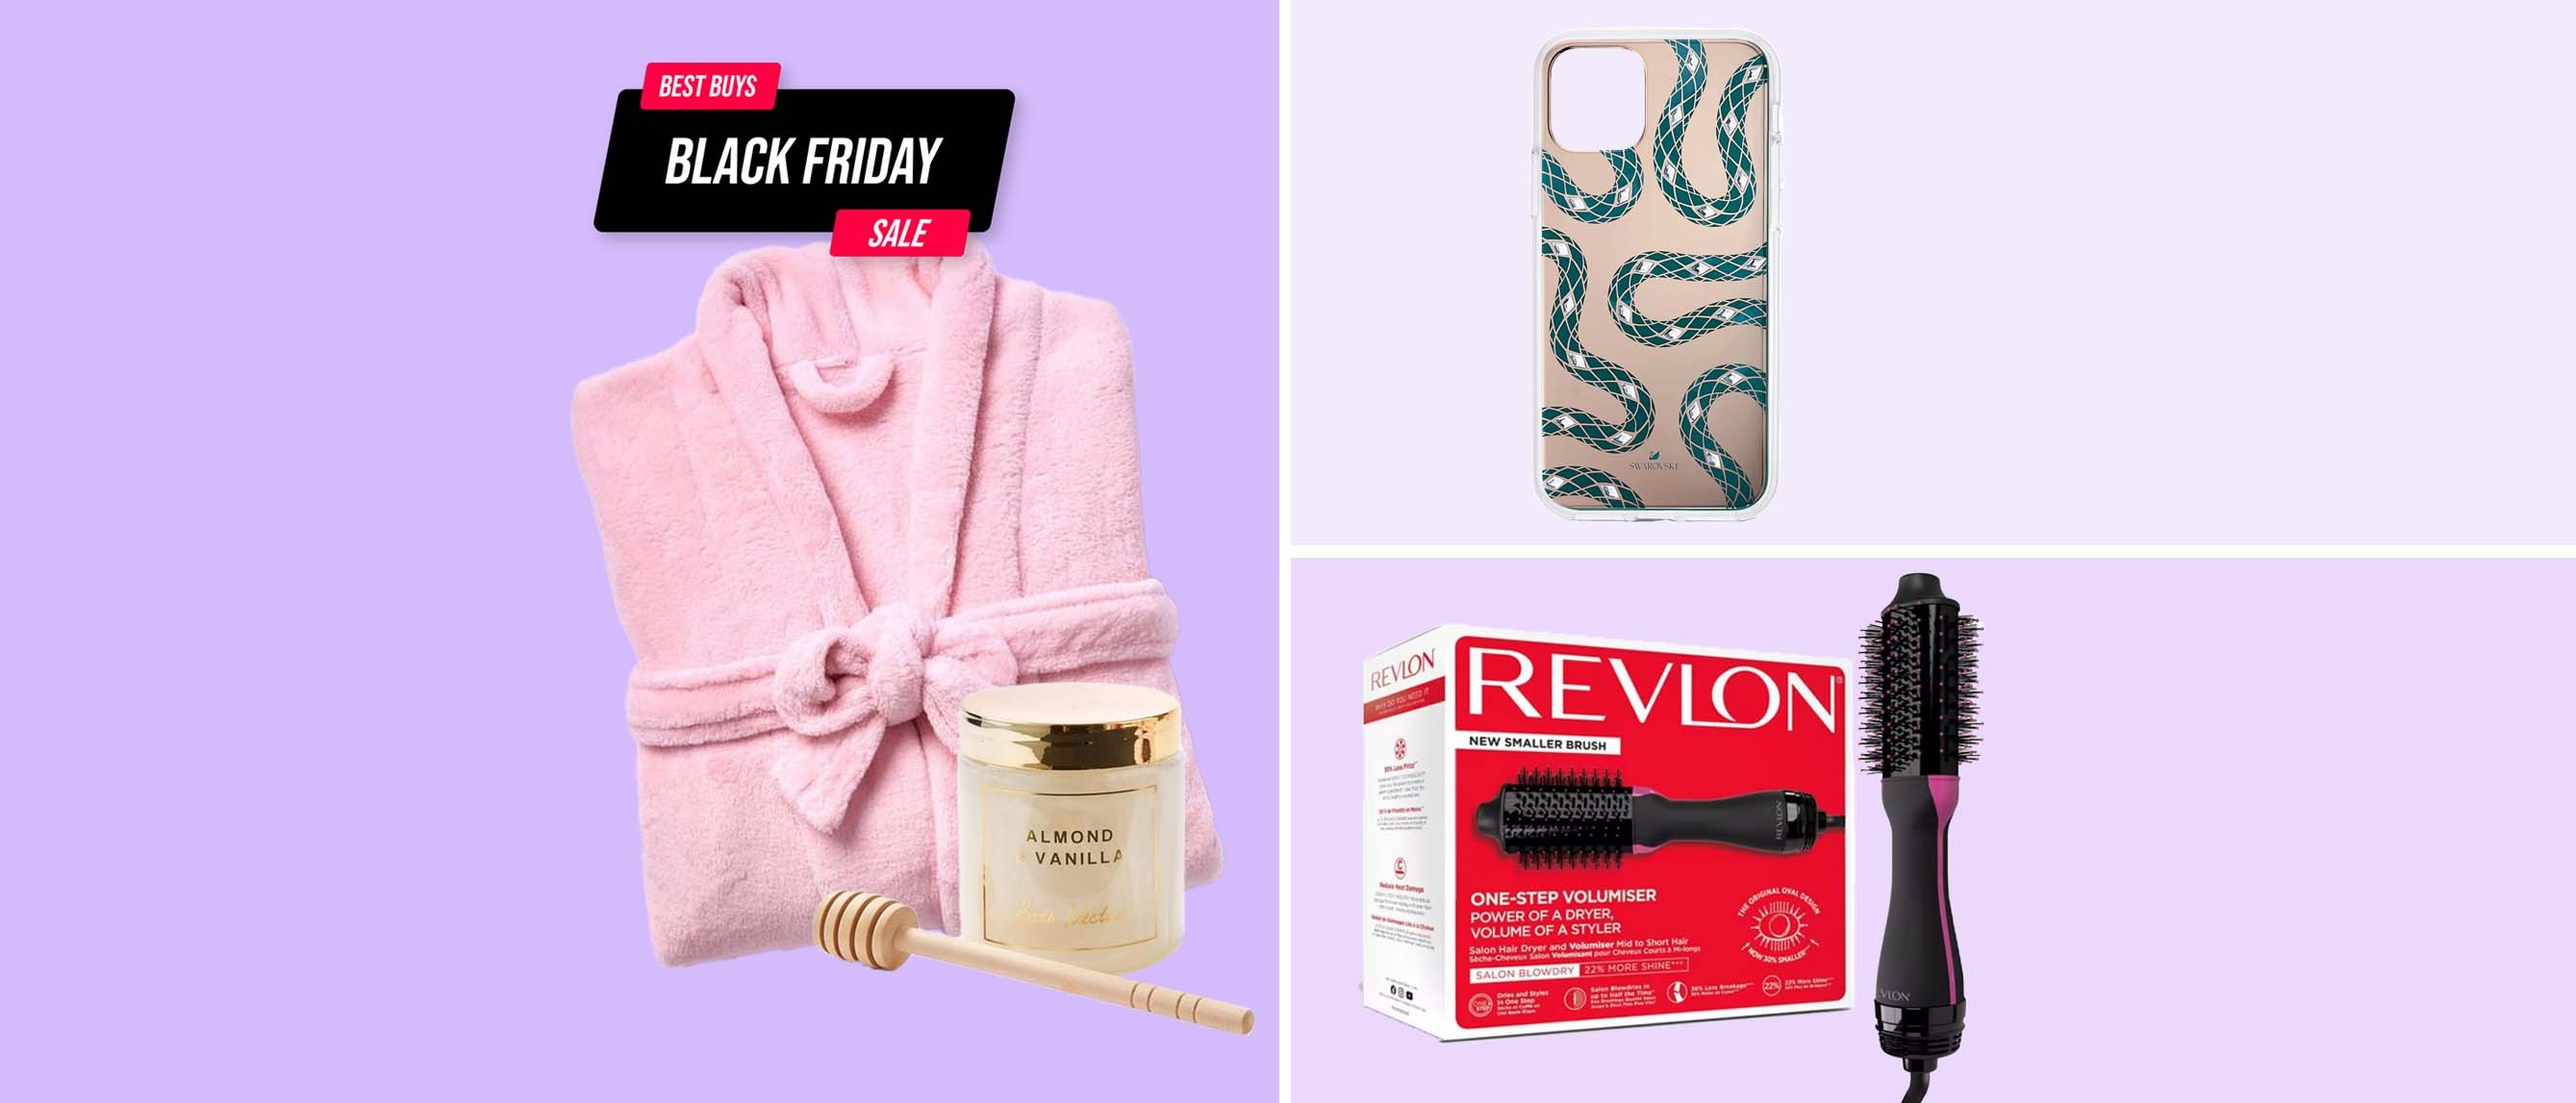 Black Friday: The best Christmas gifts for her under £50